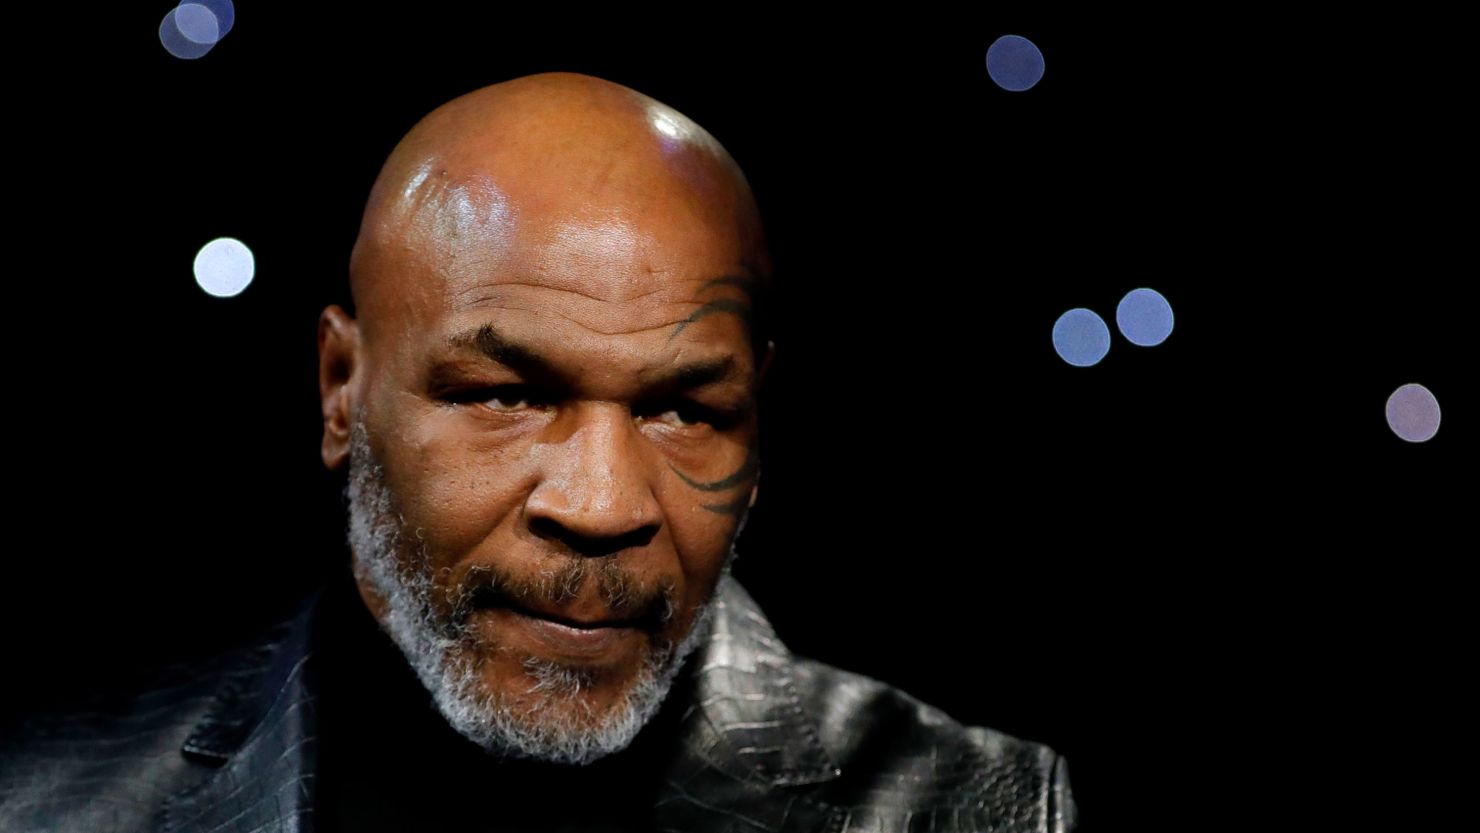 Mike Tyson is training again, with plans to return to the ring.